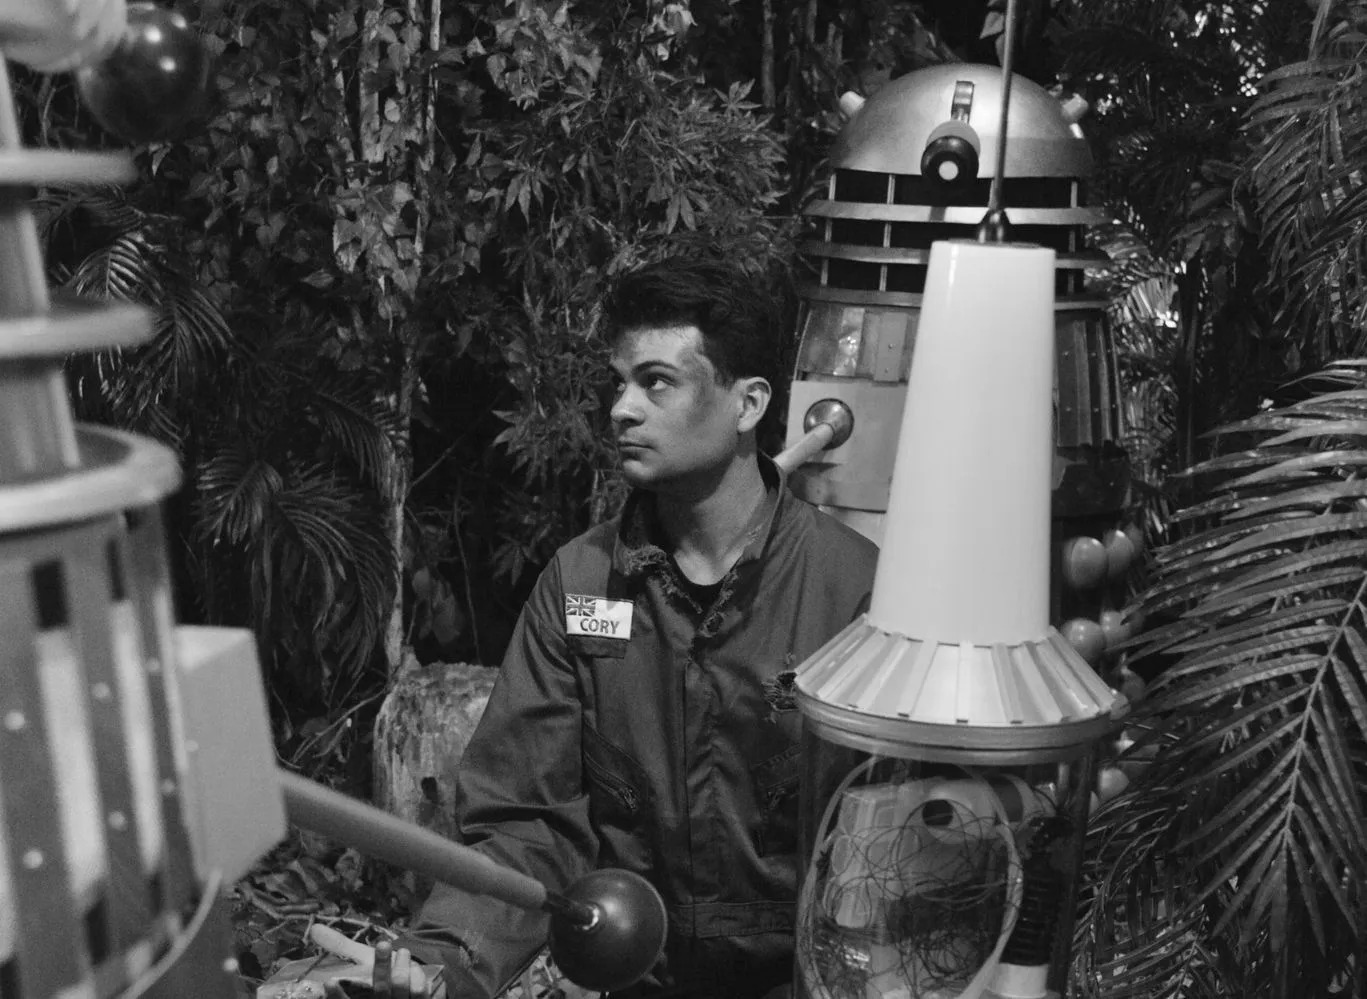 Screencap from Mission to the Unknown (Remake) showing Marco Simioni as Marc Cory, a dashing young man with short dark hair in a jumpsuit. He wears a nametag labeled 'CORY' with a Union Jack. He sits in a forest, looking up at two Daleks around him. Next to him is some sort of small rocket.